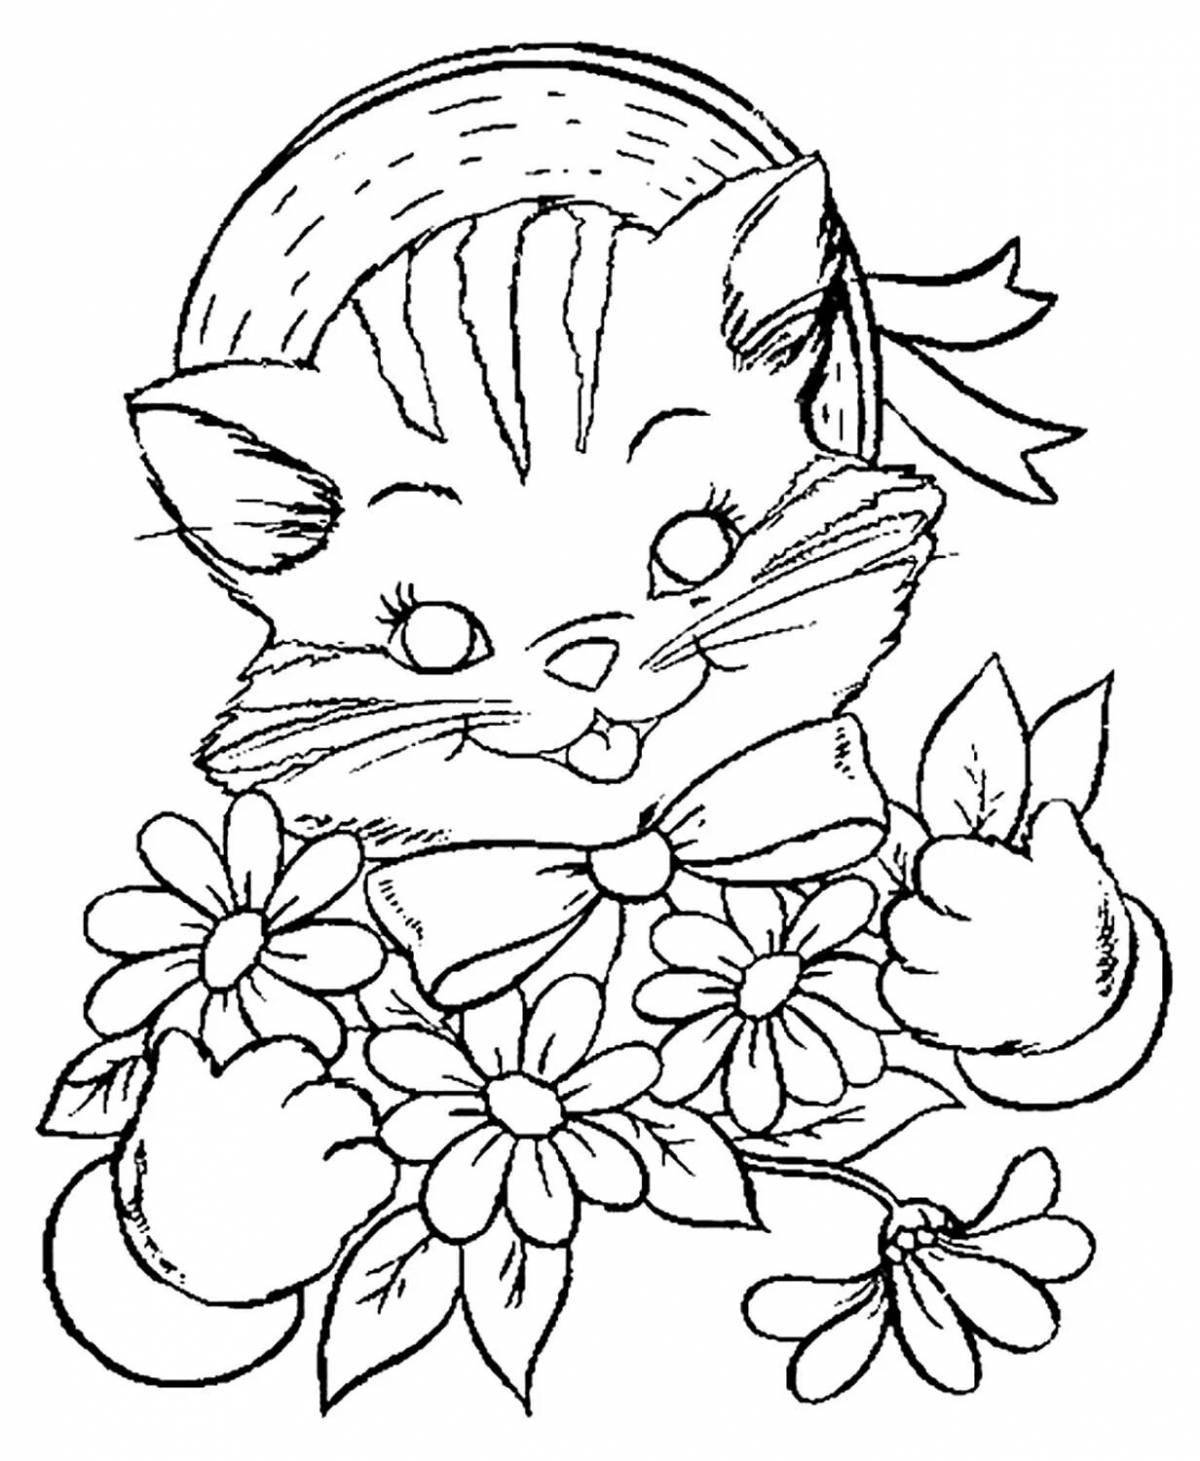 Delightful coloring book for girls 7 years old with cats